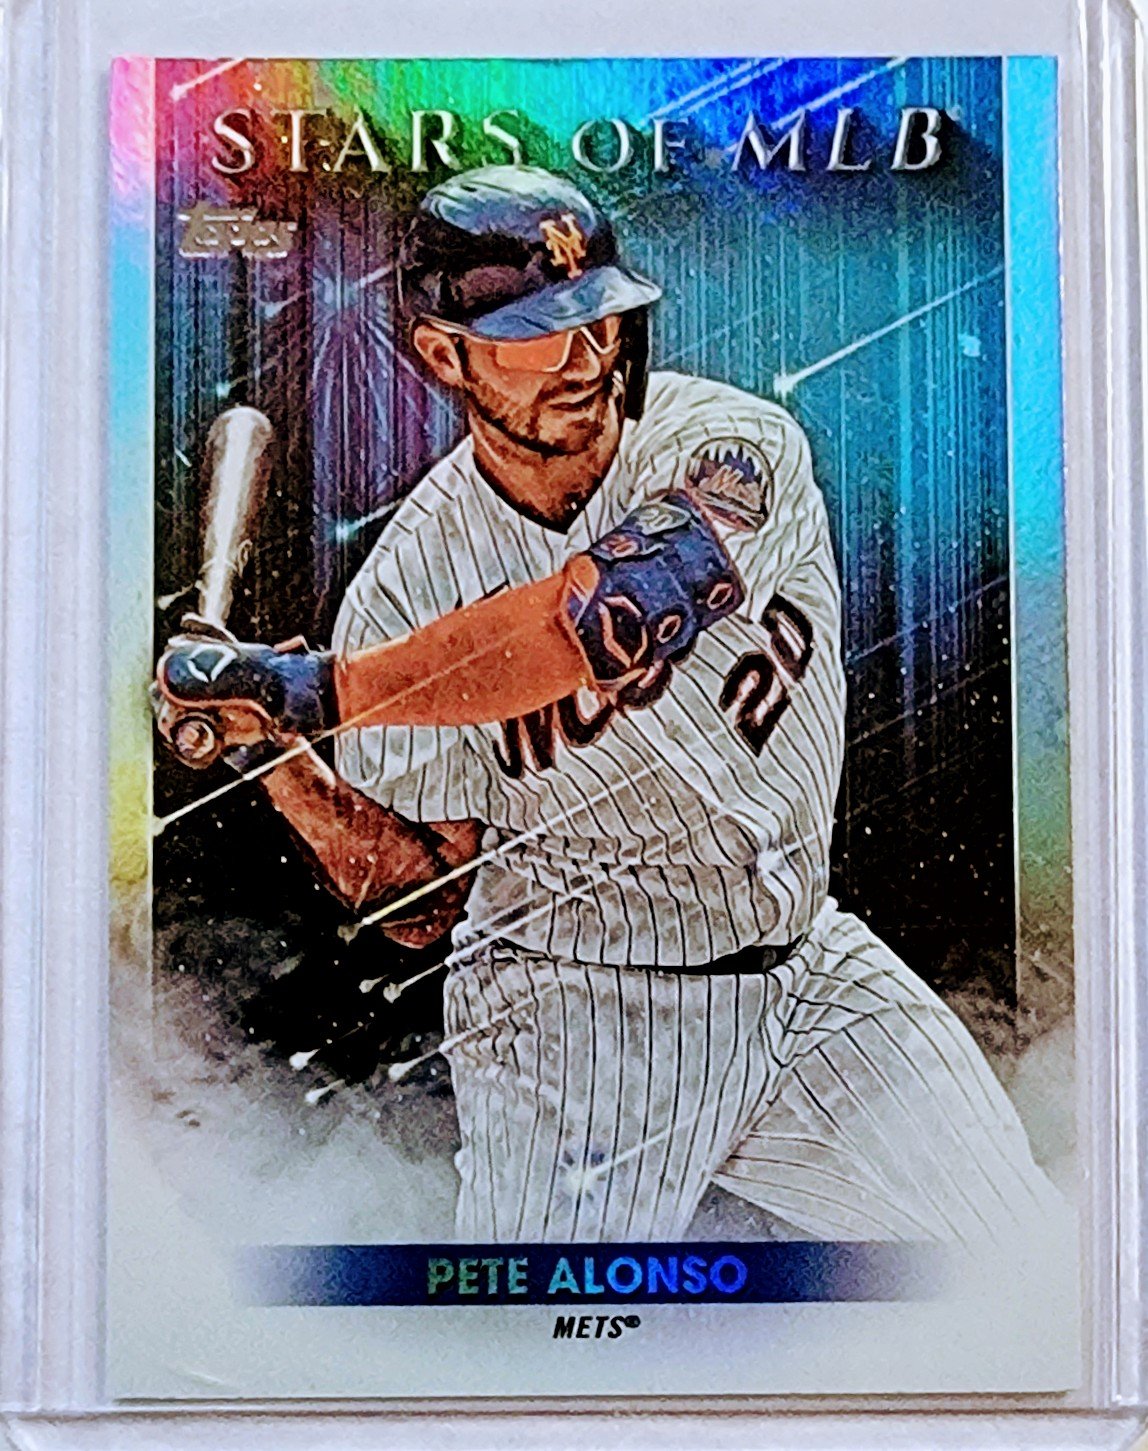 2022 Topps Pete Alonso Stars of the MLB Foil Insert Baseball Card AVM1 simple Xclusive Collectibles   